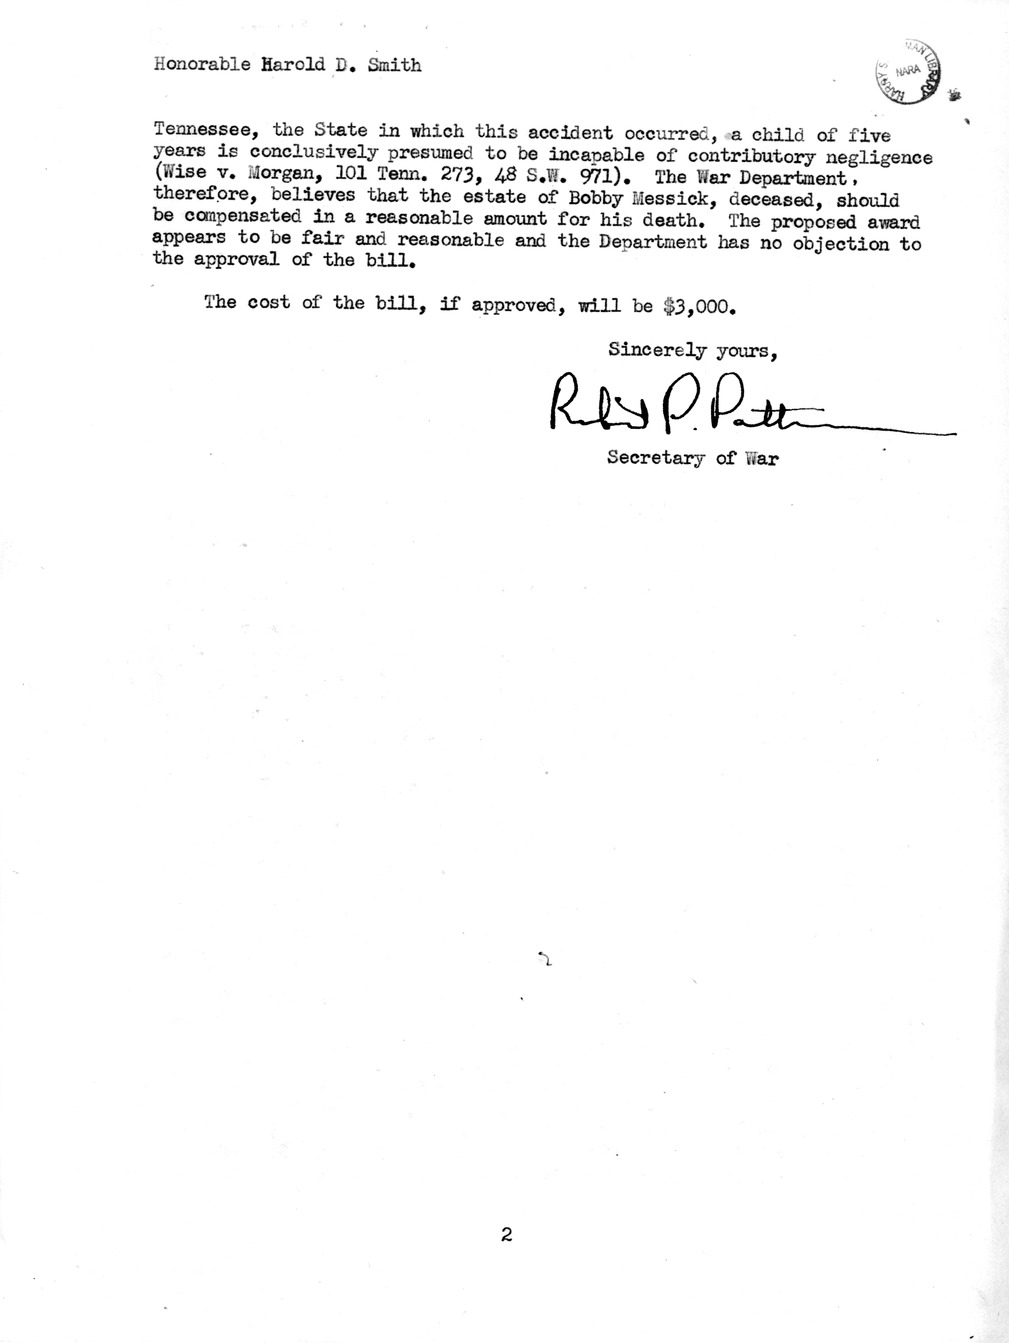 Memorandum from Frederick J. Bailey to M. C. Latta, H. R. 2974, For the Relief of the Estate of Bobby Messick, with Attachments